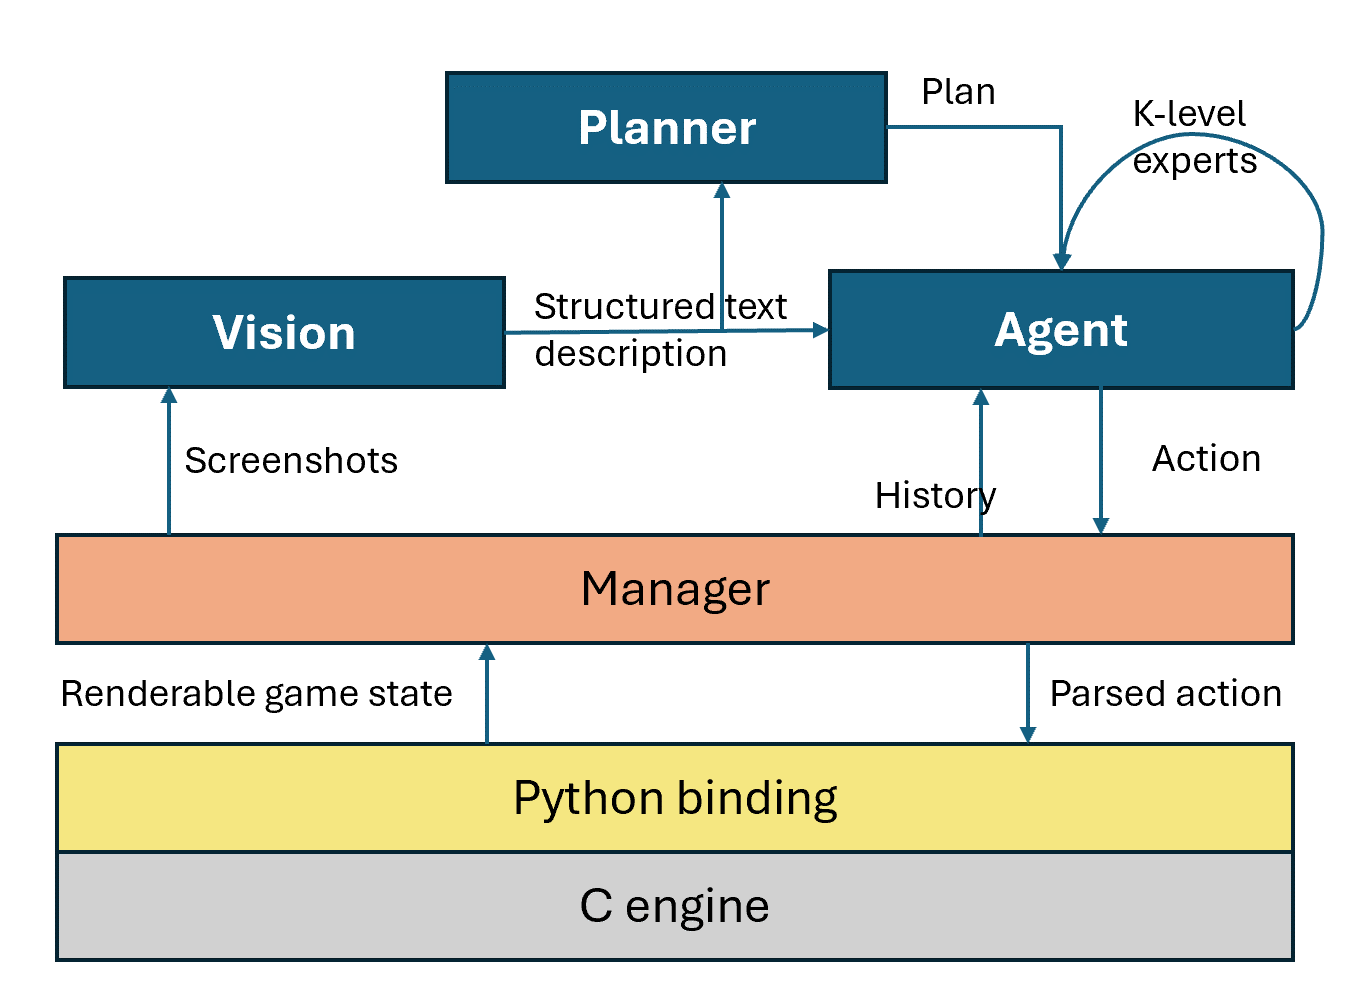 Architecture of the system